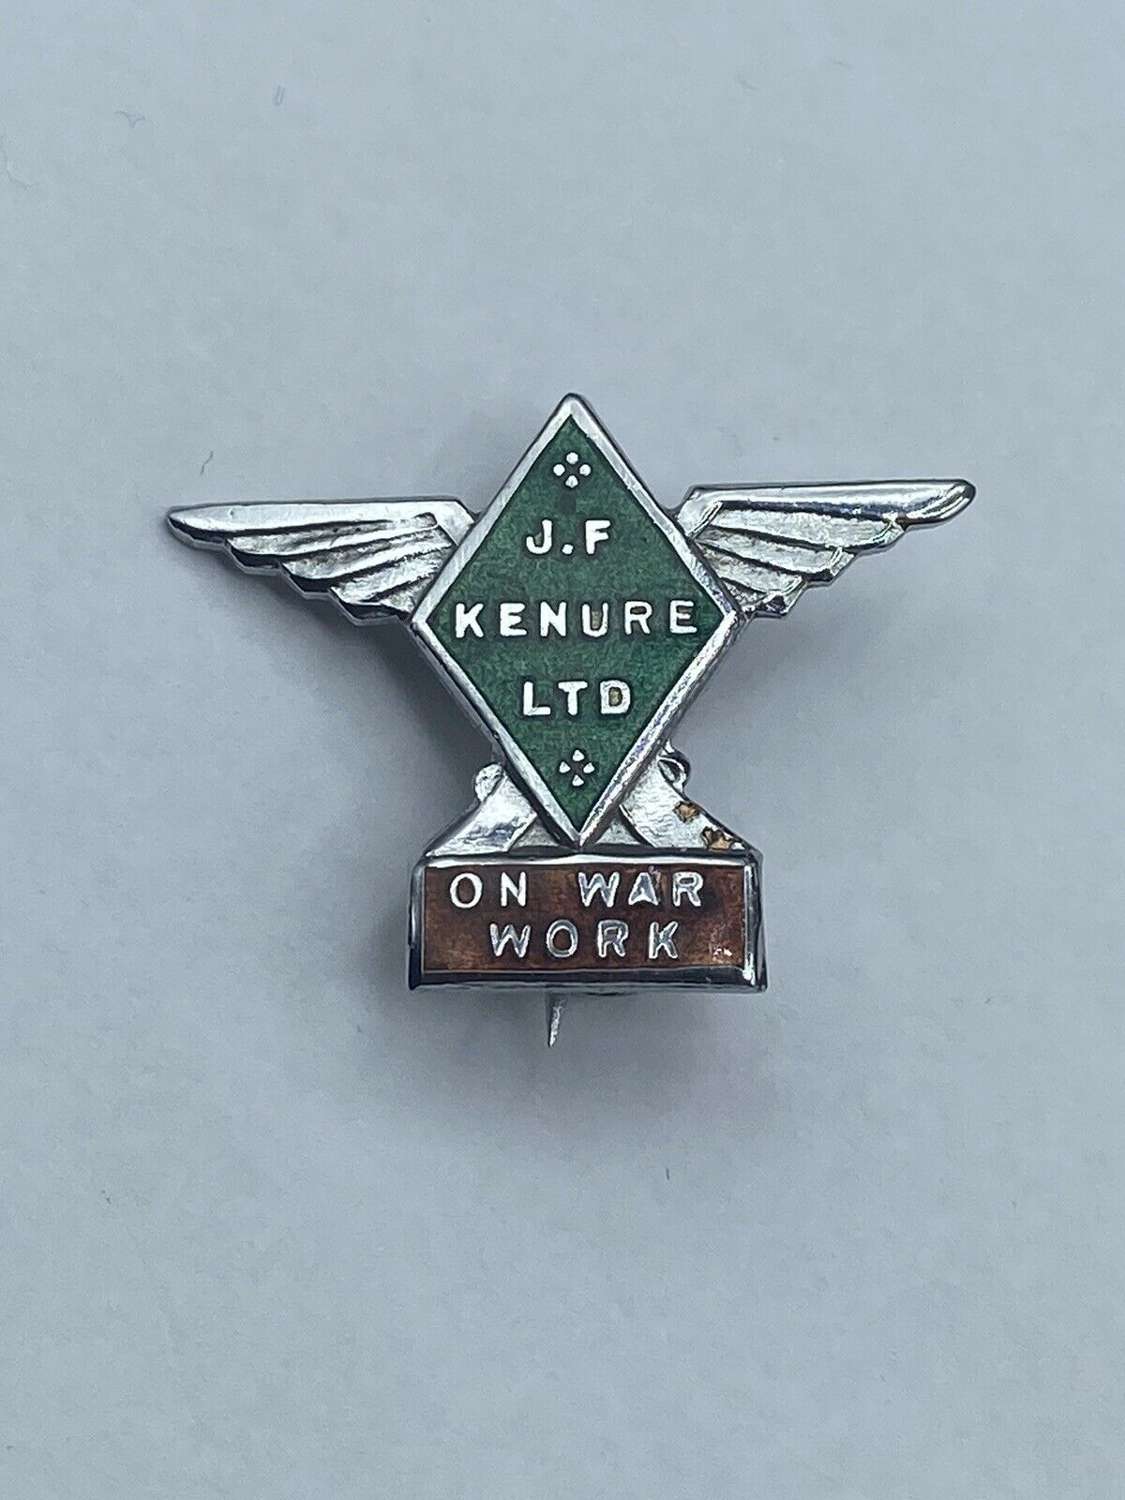 WW2 On War Work Badge For Kenure Ltd Aircraft Workers & Manufactures